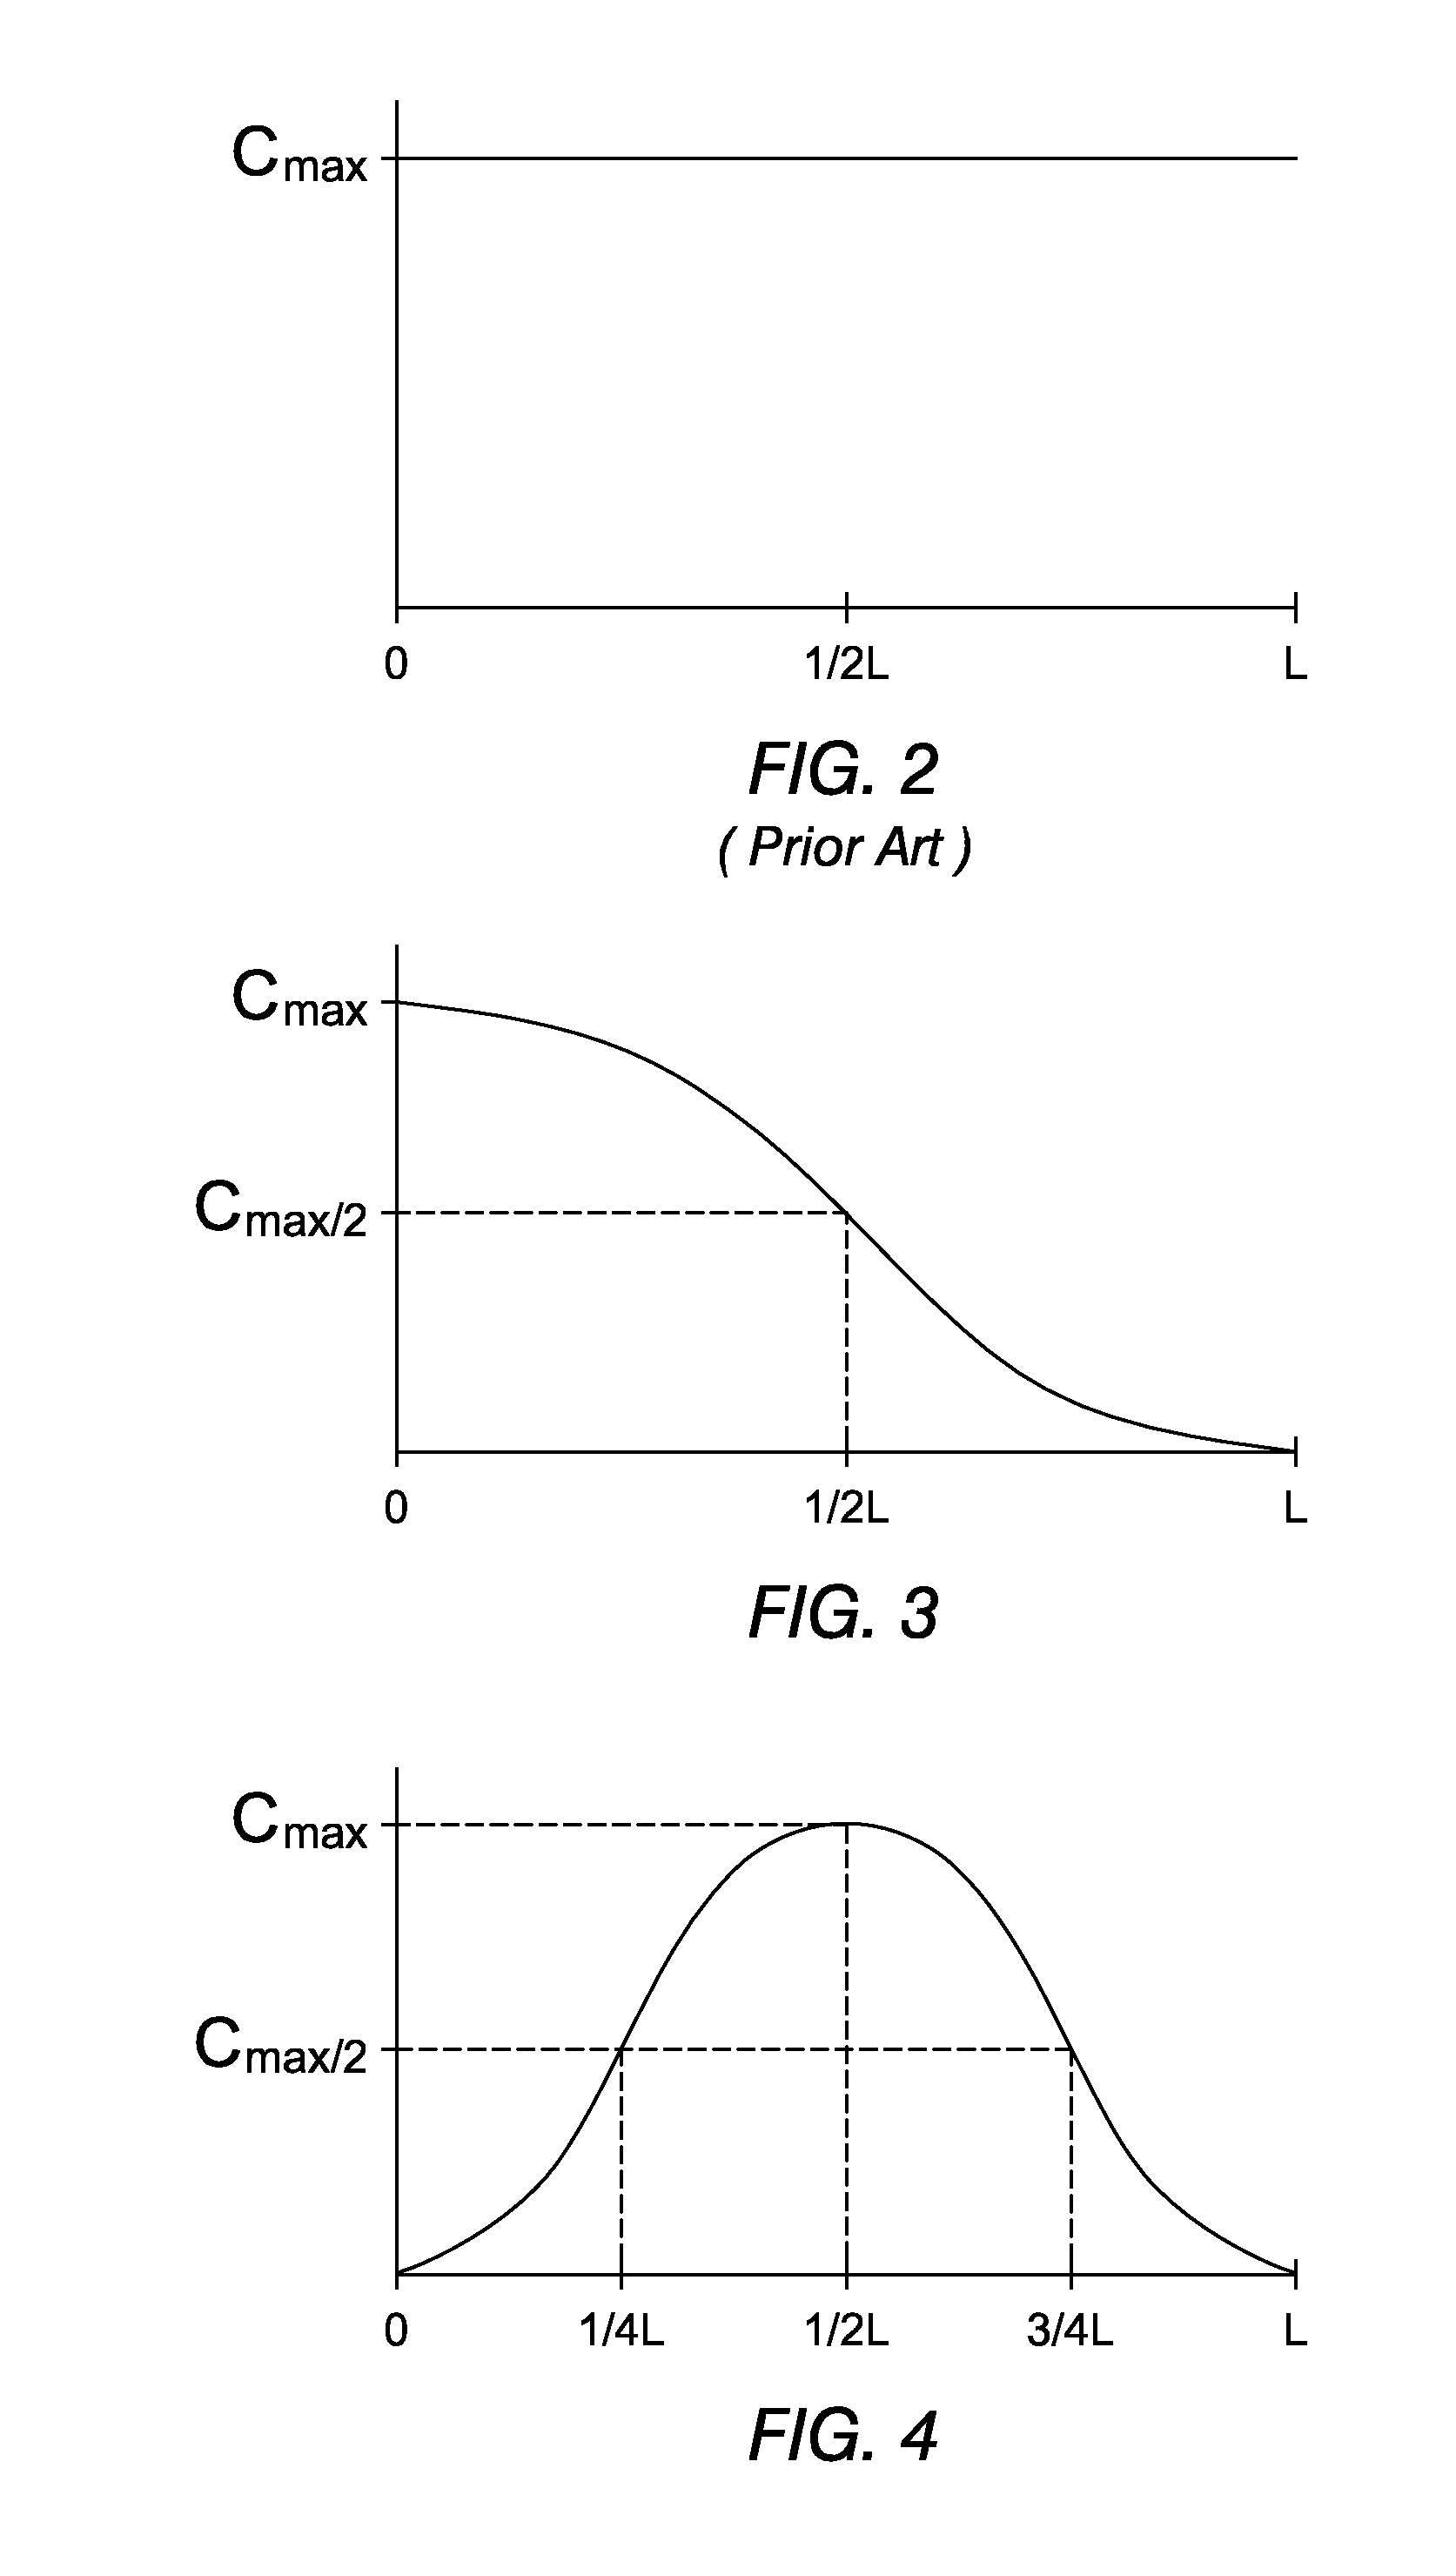 Emissive ceramic materials having a dopant concentration gradient and methods of making and using the same